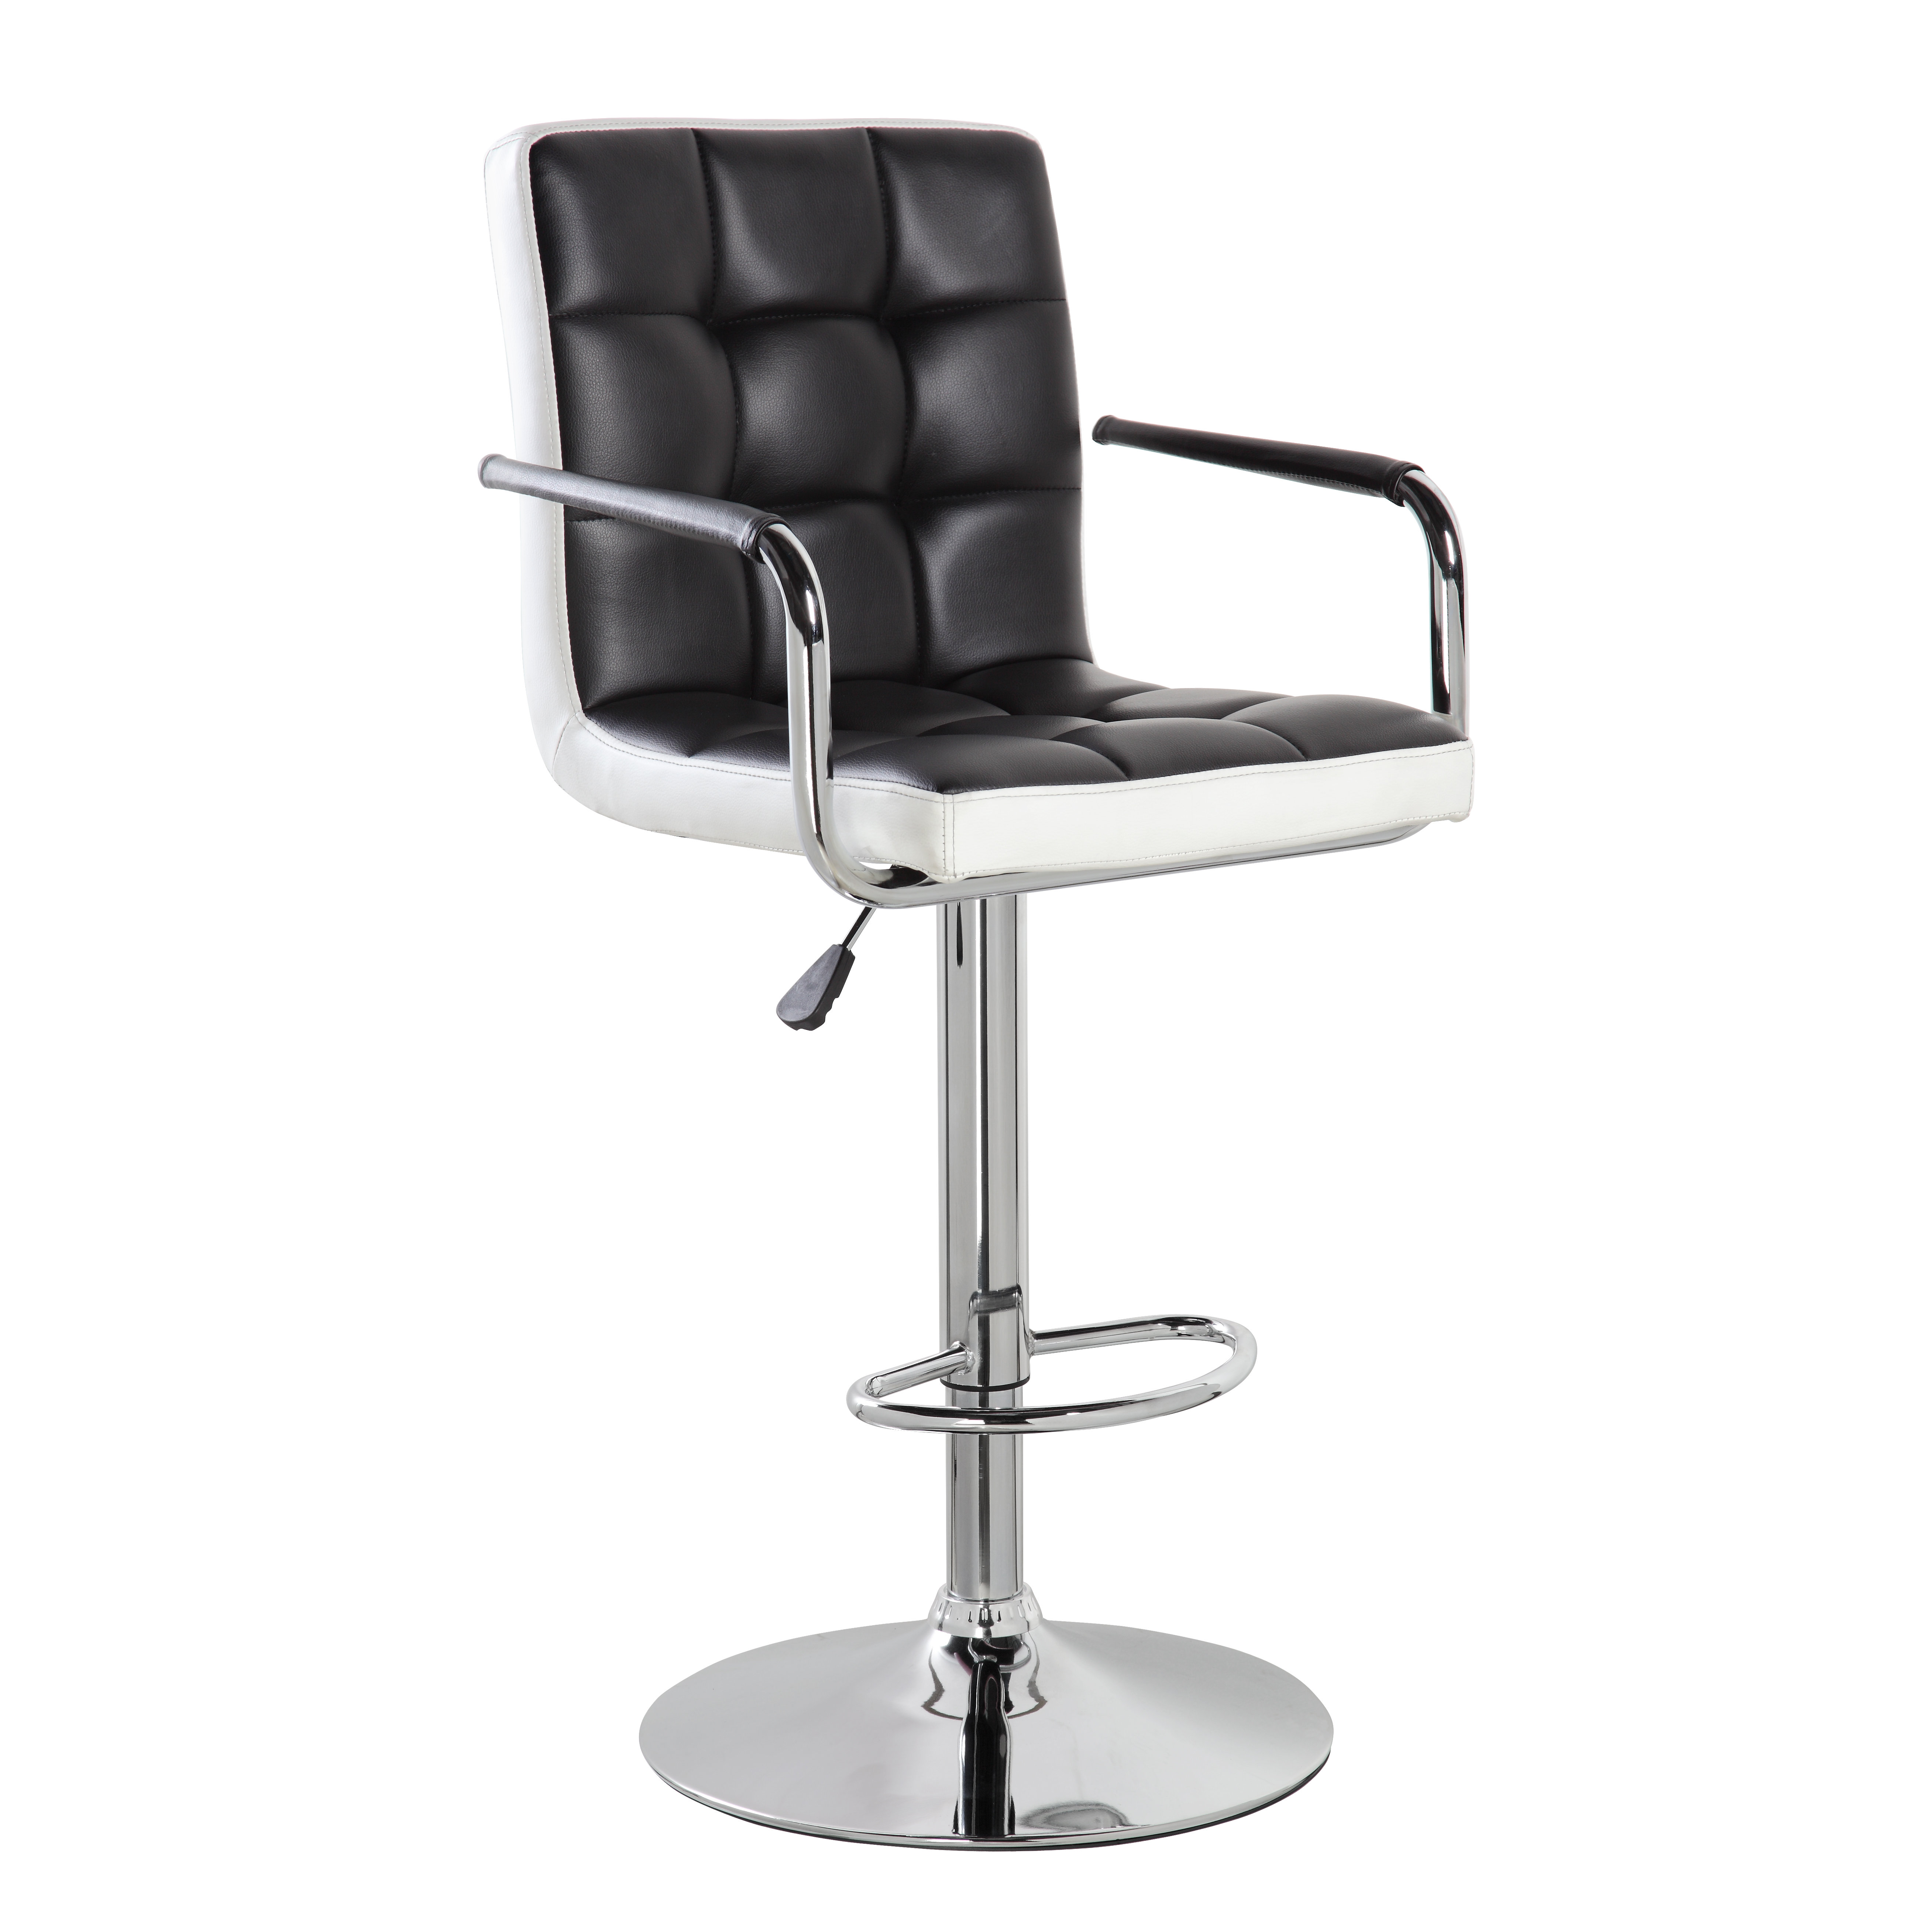 United Office Chair Adjustable Height Swivel Bar Stool With Cushion 